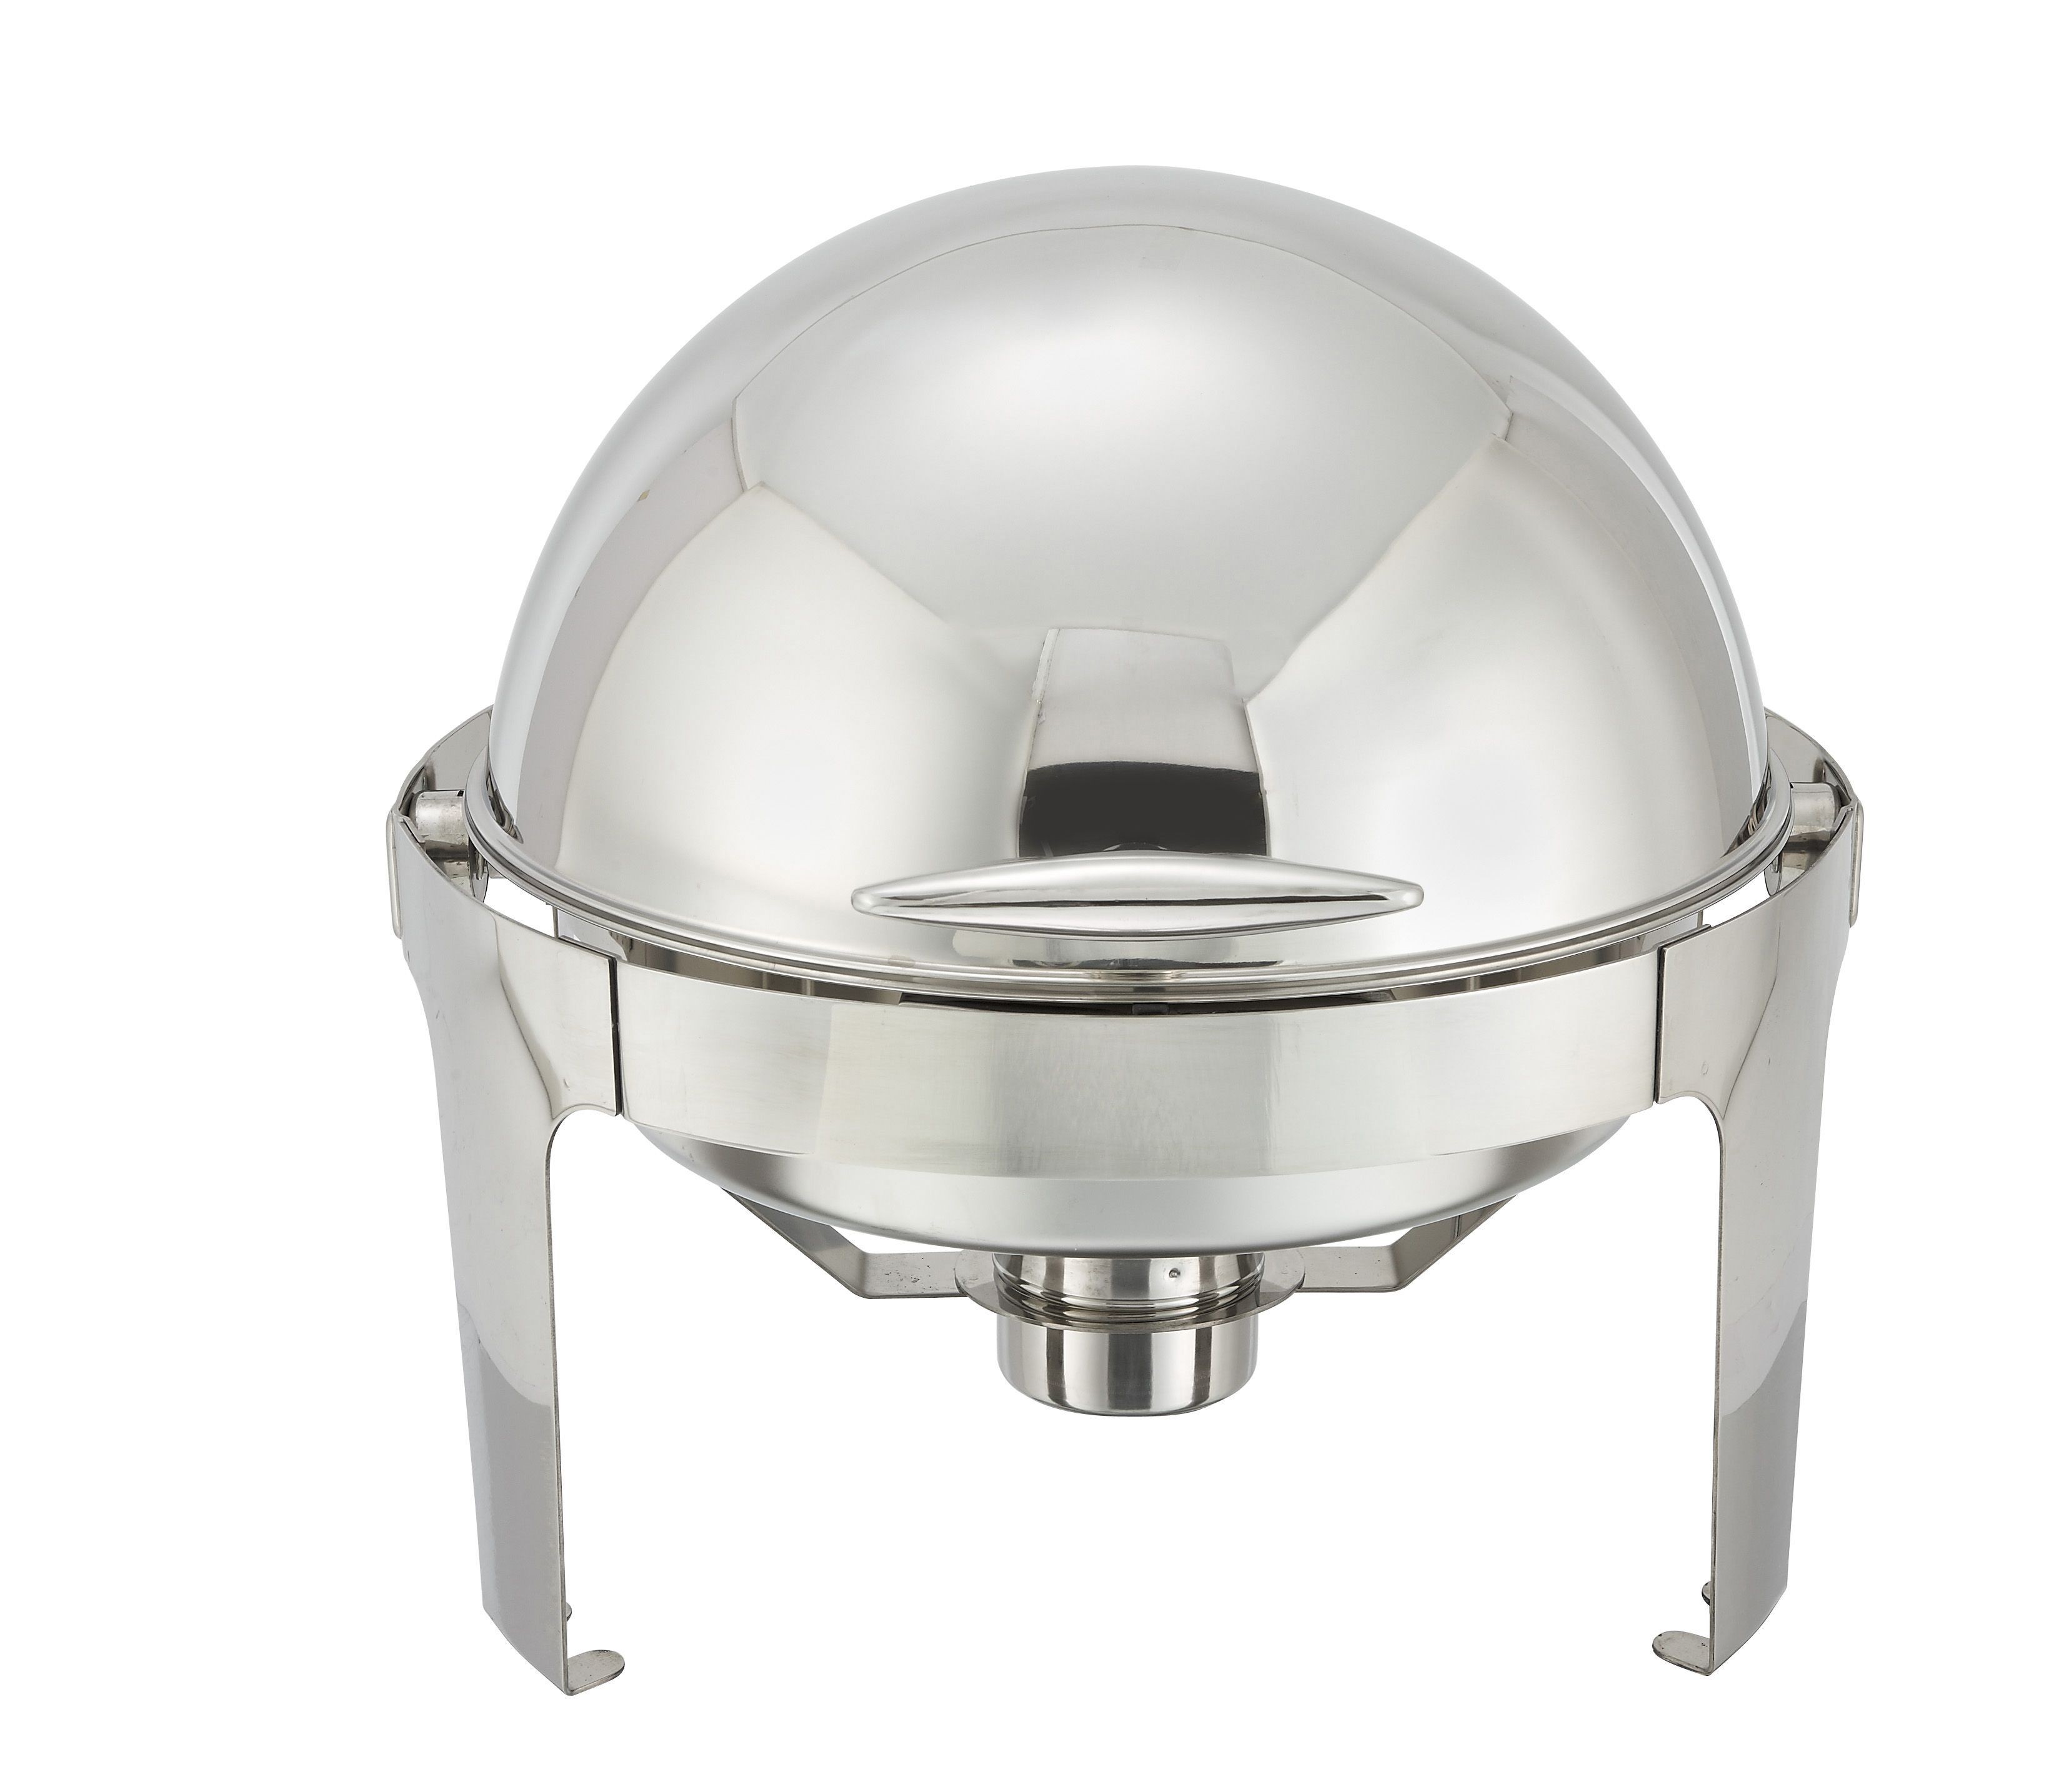  TigerChef Round Stainless Steel 6 Qt. Roll Top Chafing Dish